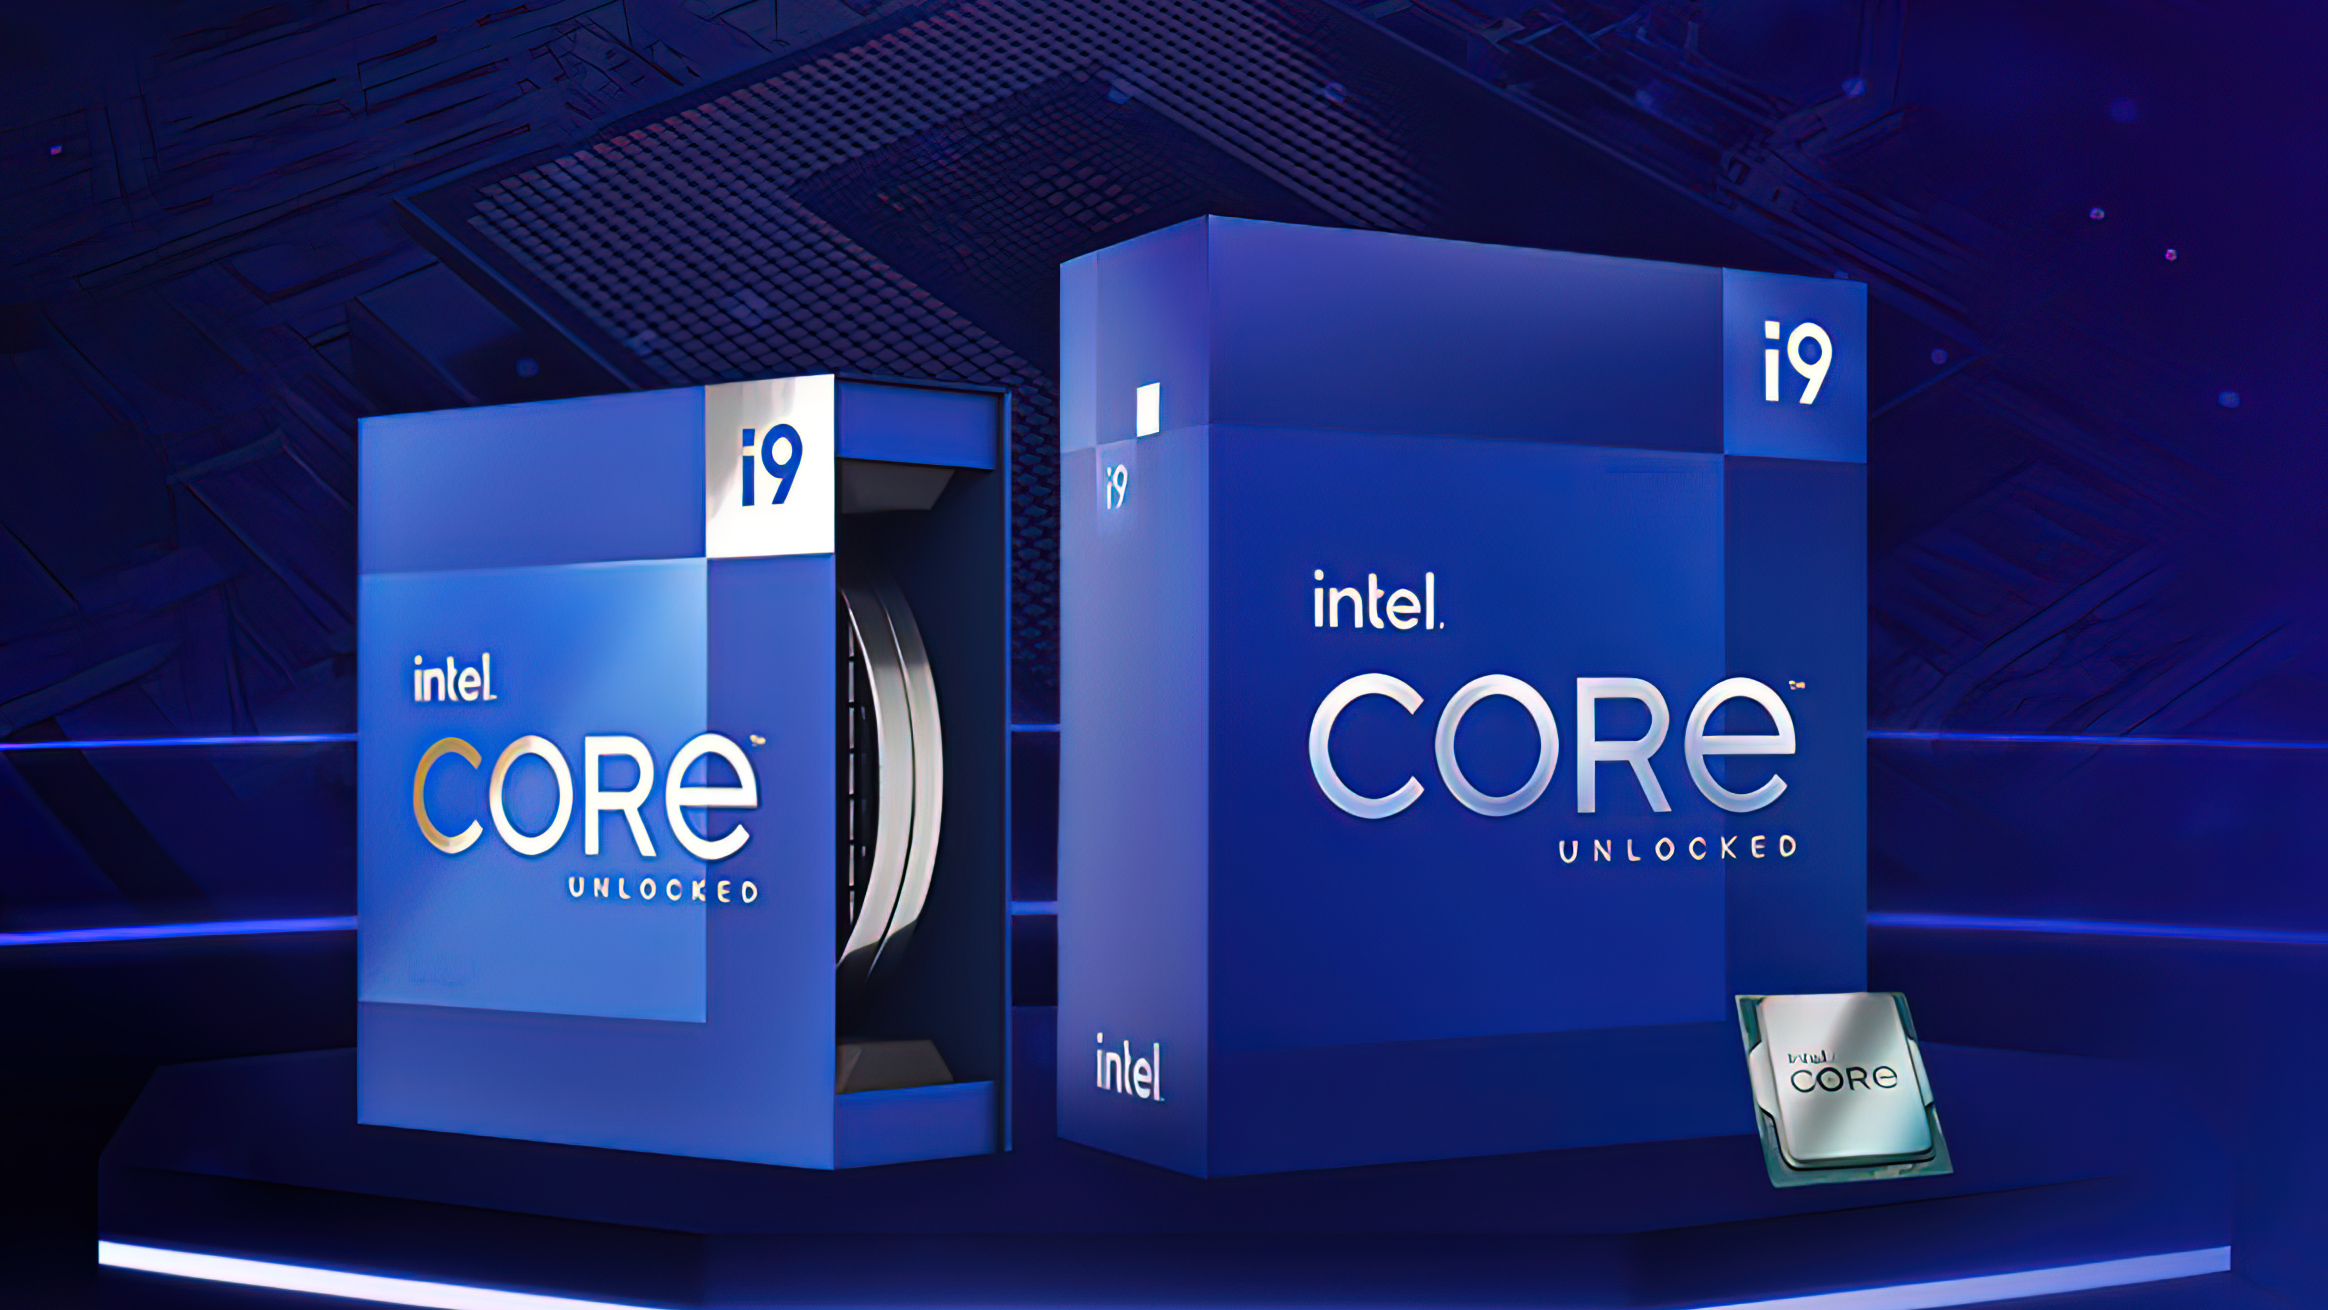 Intel APO increases gaming performance by 31% on 14th Gen CPUs